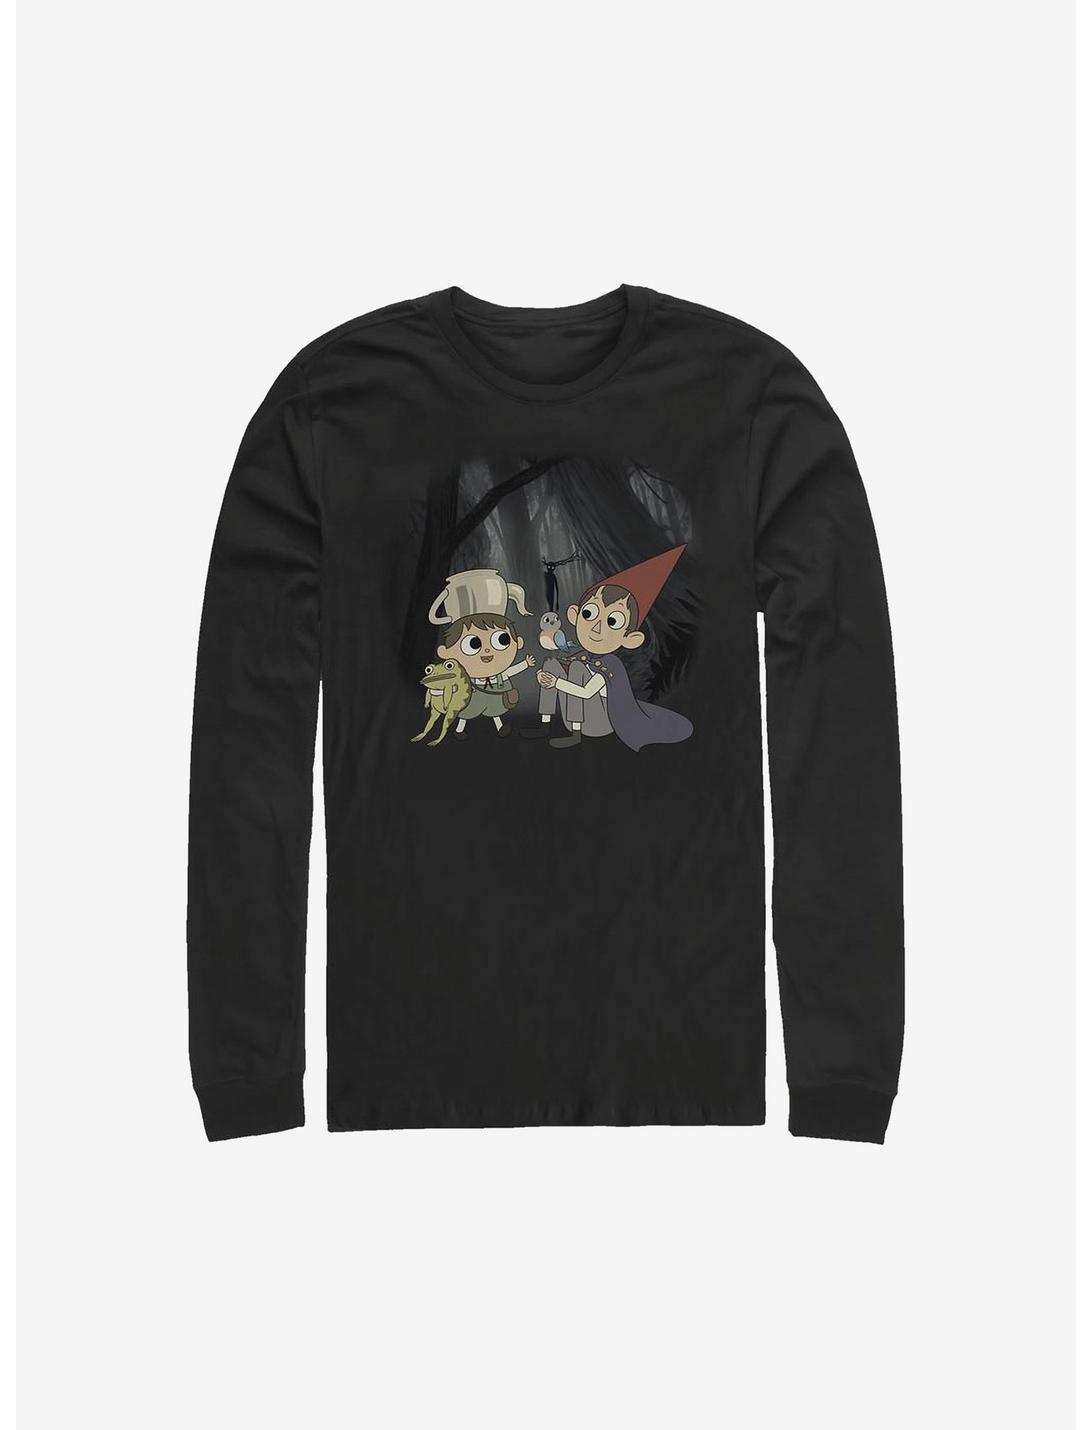 Over The Garden Wall I See You Long-Sleeve T-Shirt, BLACK, hi-res